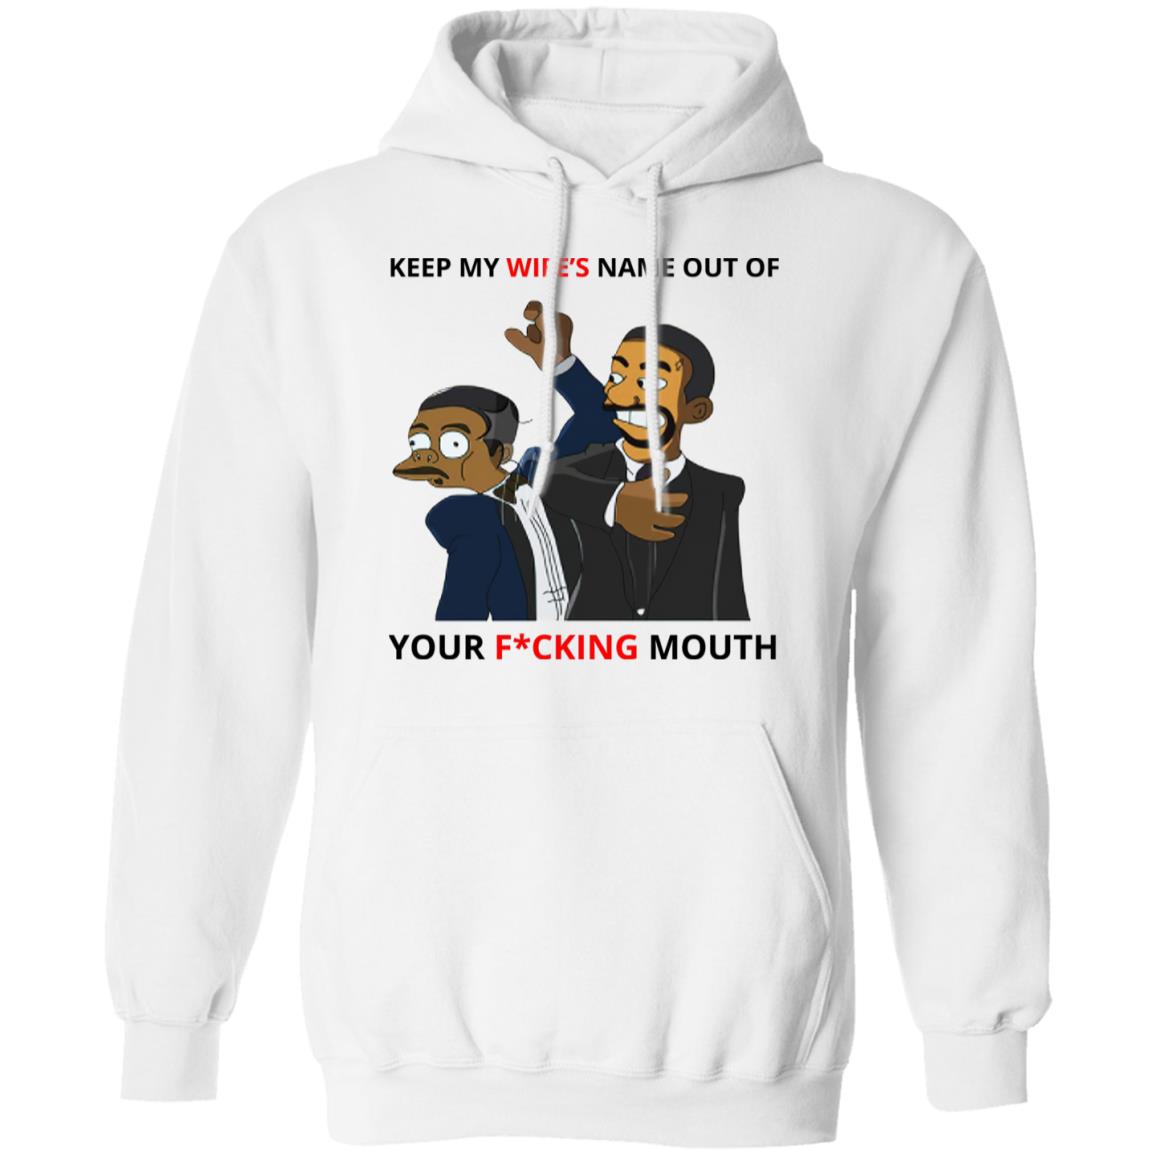 Keep My Wife’s Name Out Of Your Fucking Mouth Shirt 1